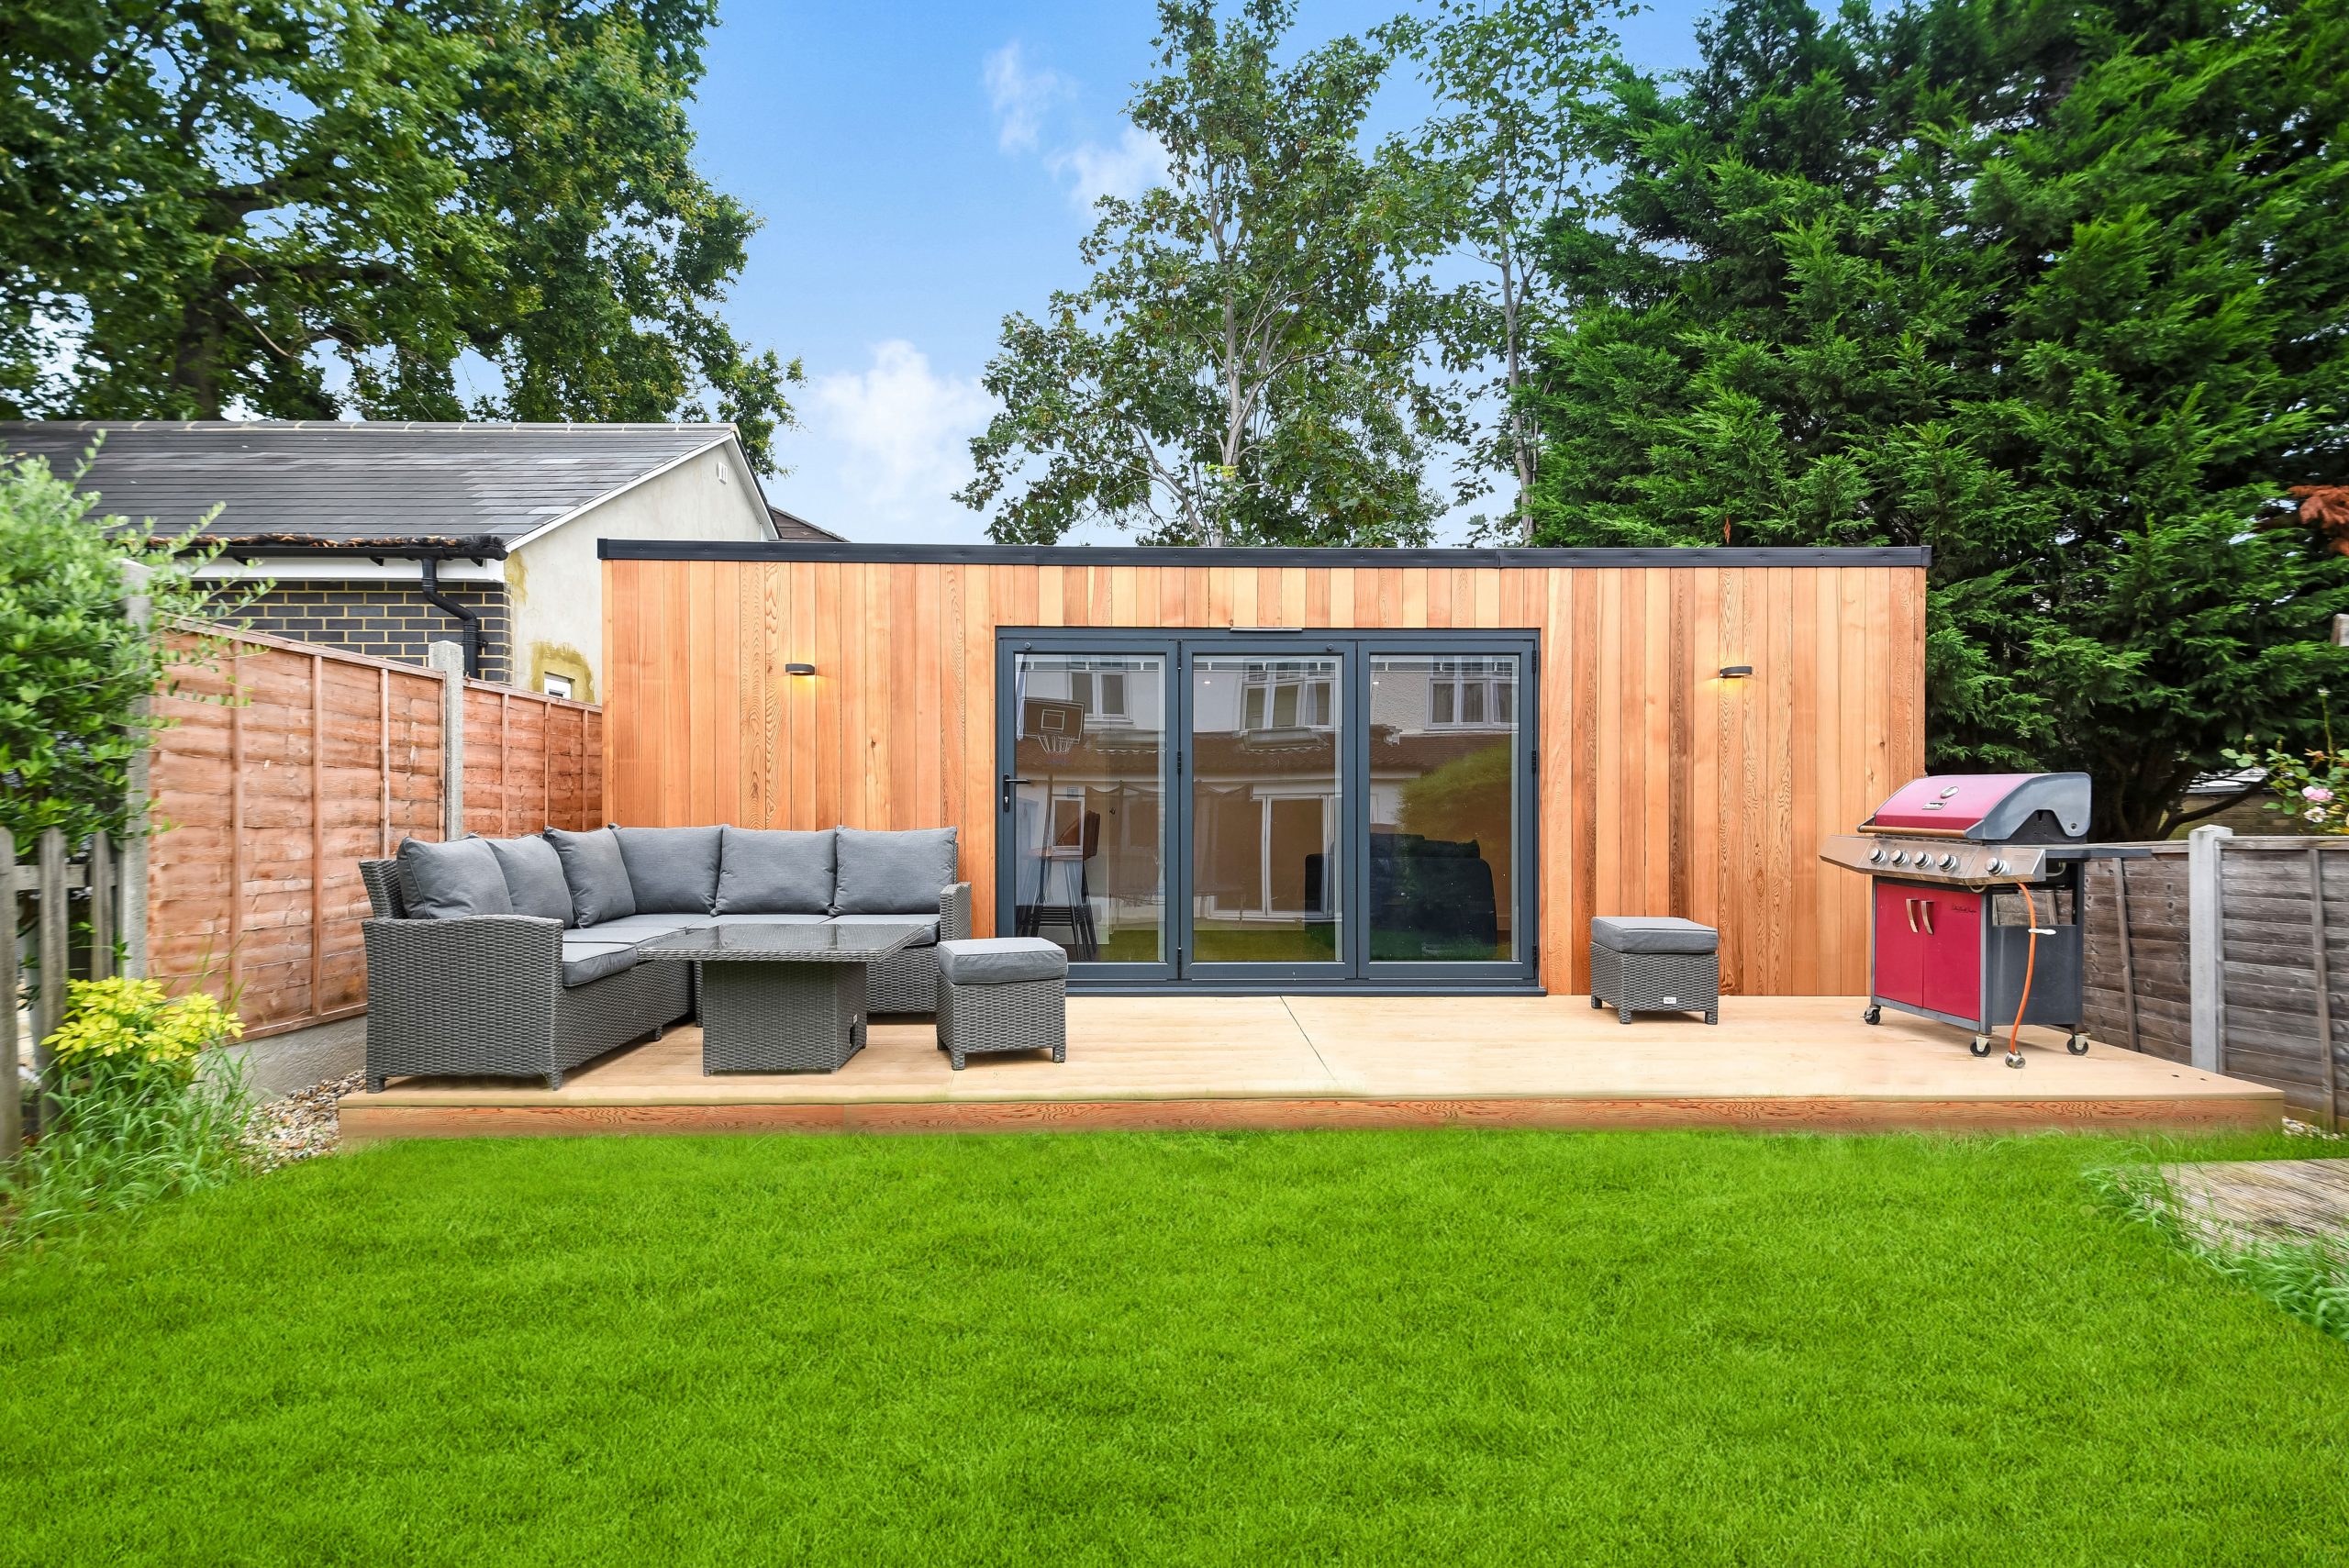 large garden room for entertaining with decking area